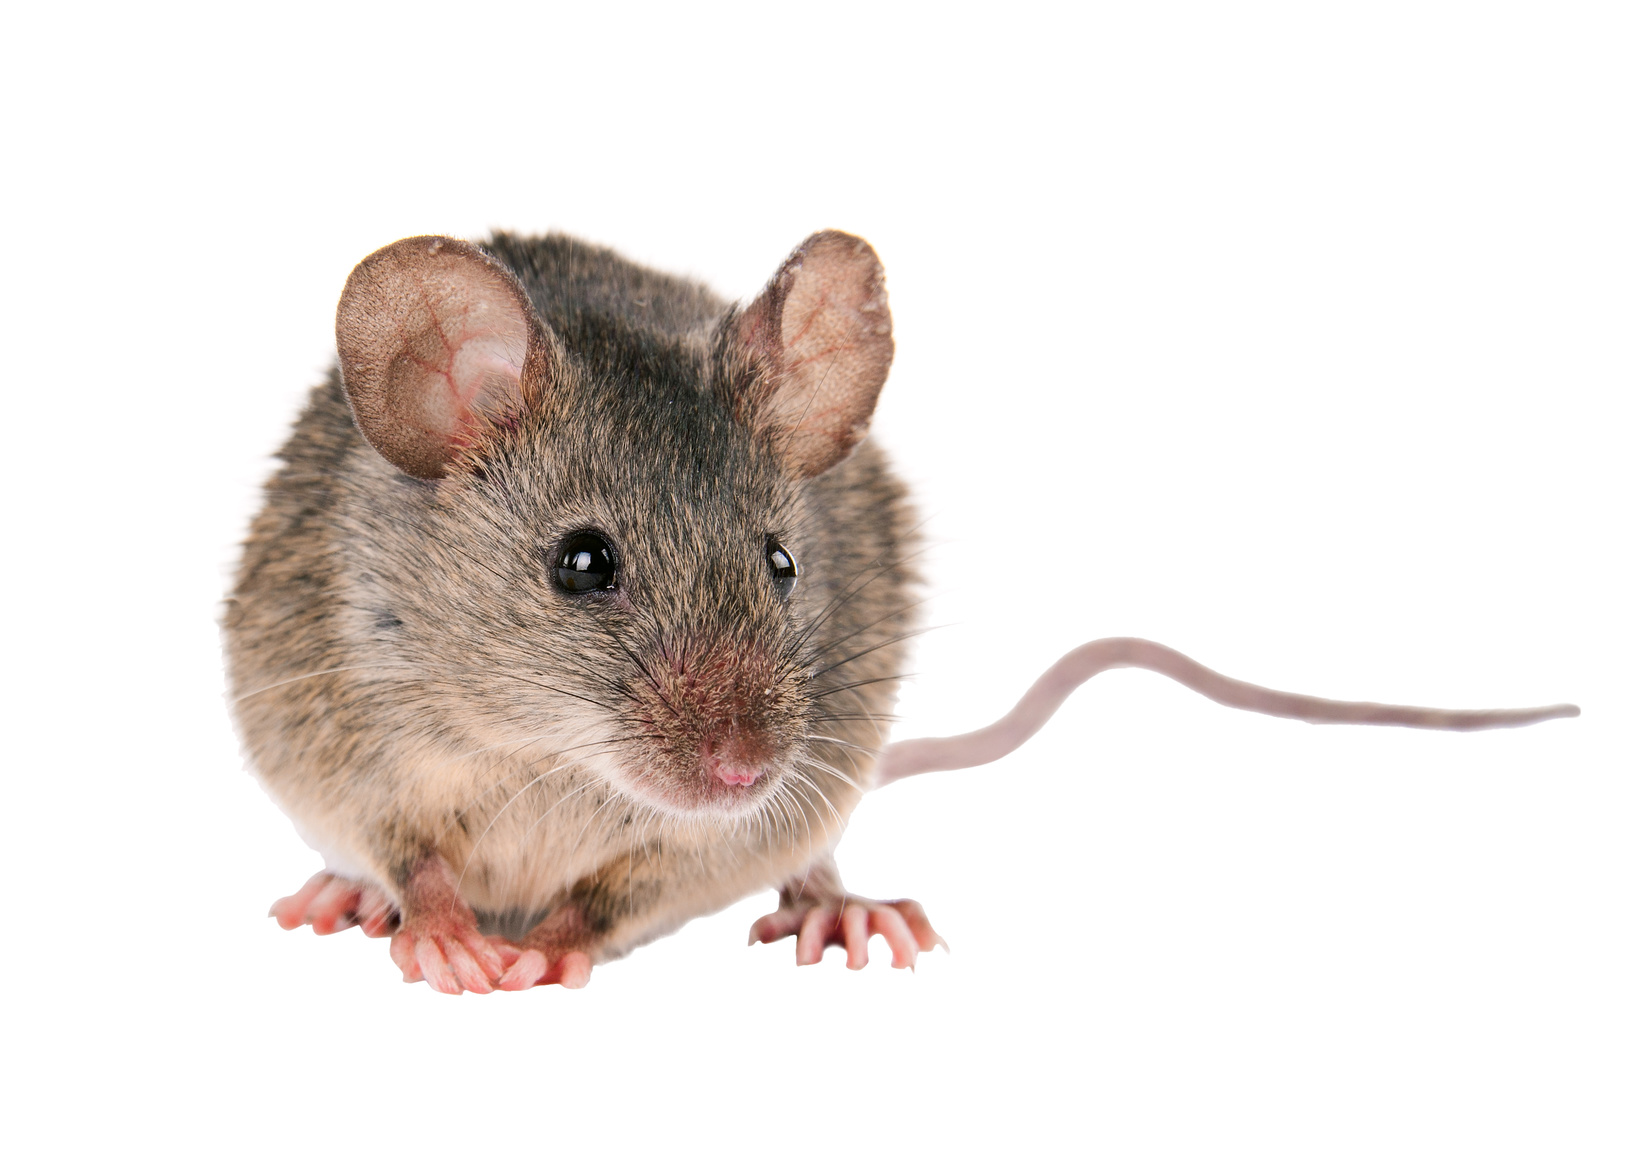 Rodent Control Services Orlando – Top Rodent-Proofing Tricks